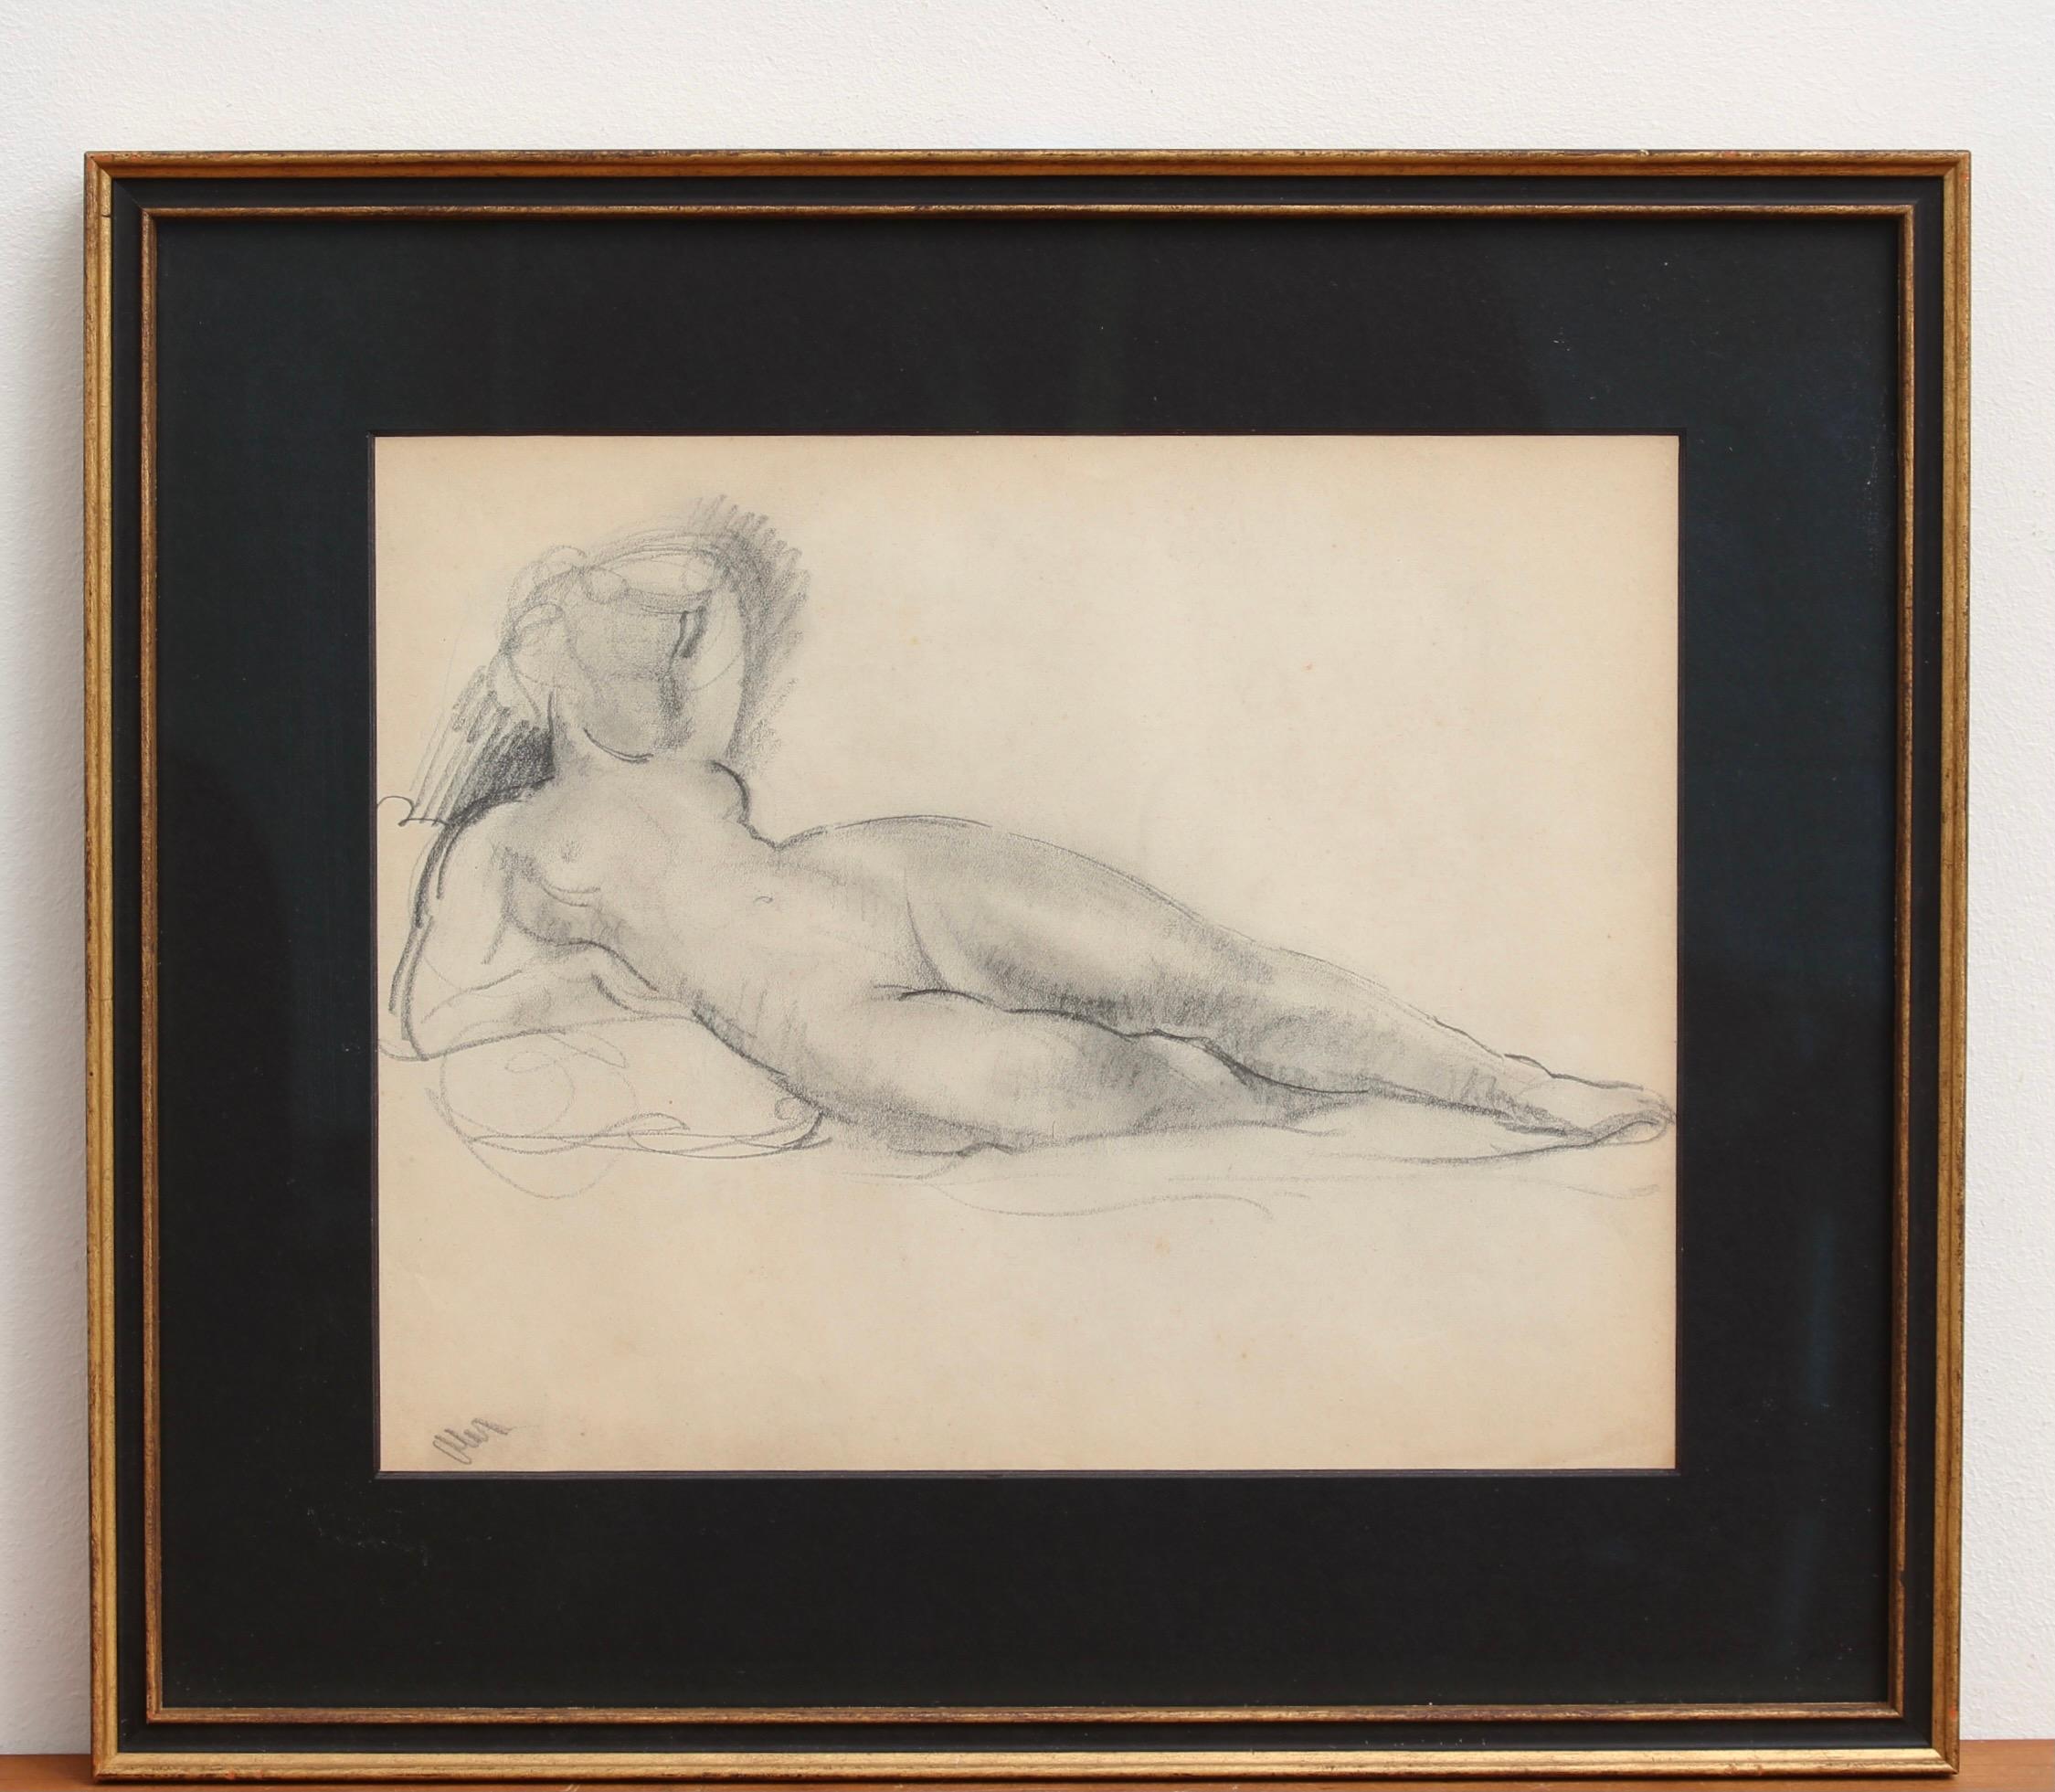 'Portrait of Reclining Nude', pencil on paper, by French artist, Guillaume Dulac (circa 1920s). An artist known for his exquisite drawings - many are sketches for his larger oil paintings or other works - this piece is compelling because its image